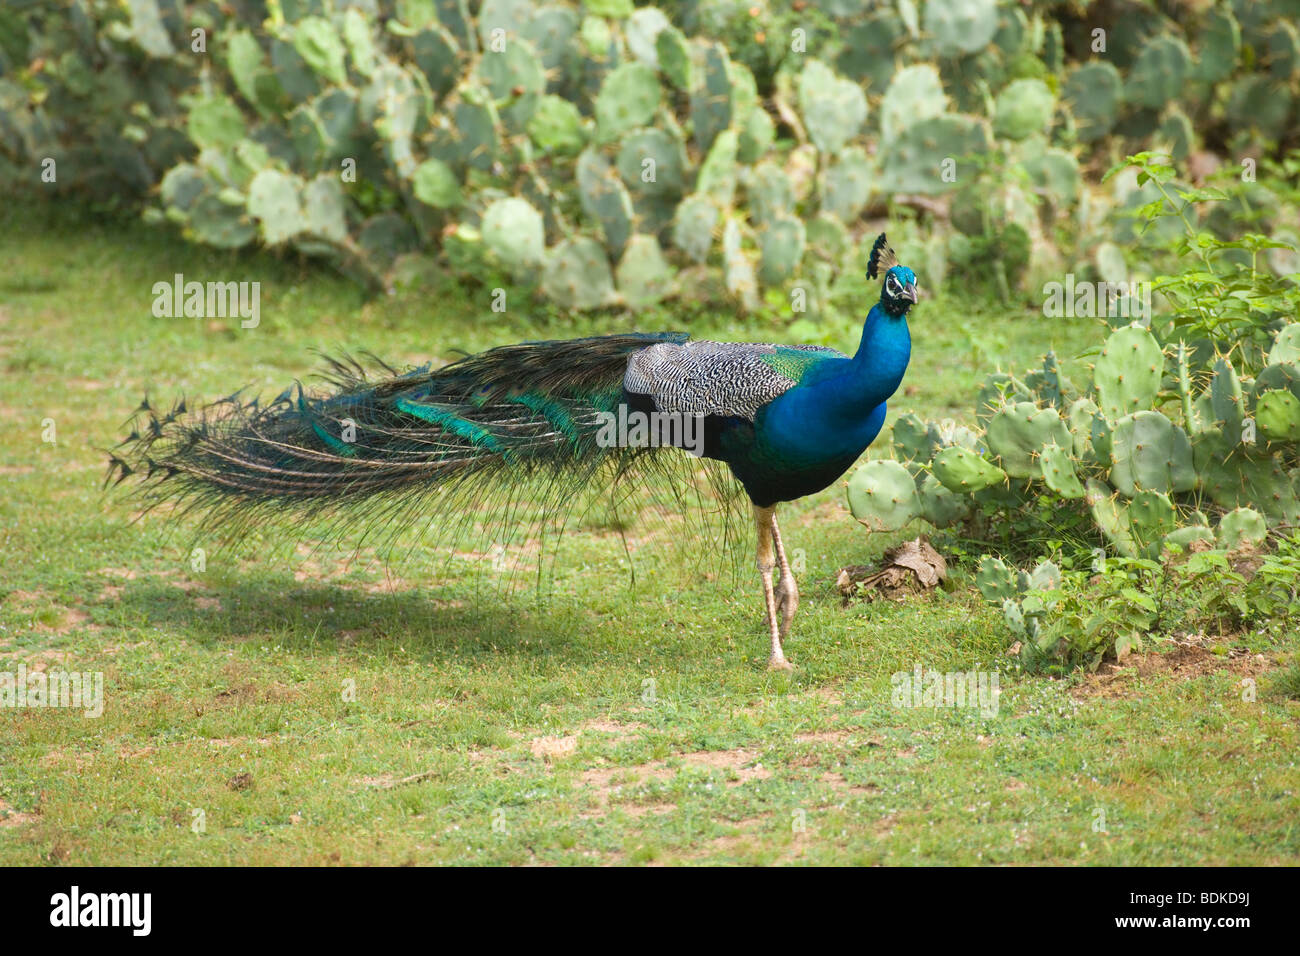 Common, Indian or Blue Peafowl (Pavo cristata). Peacock or male. Walking amongst a background of Prickly Pear Cactus- an introduced plant to Sri Lanka. Stock Photo